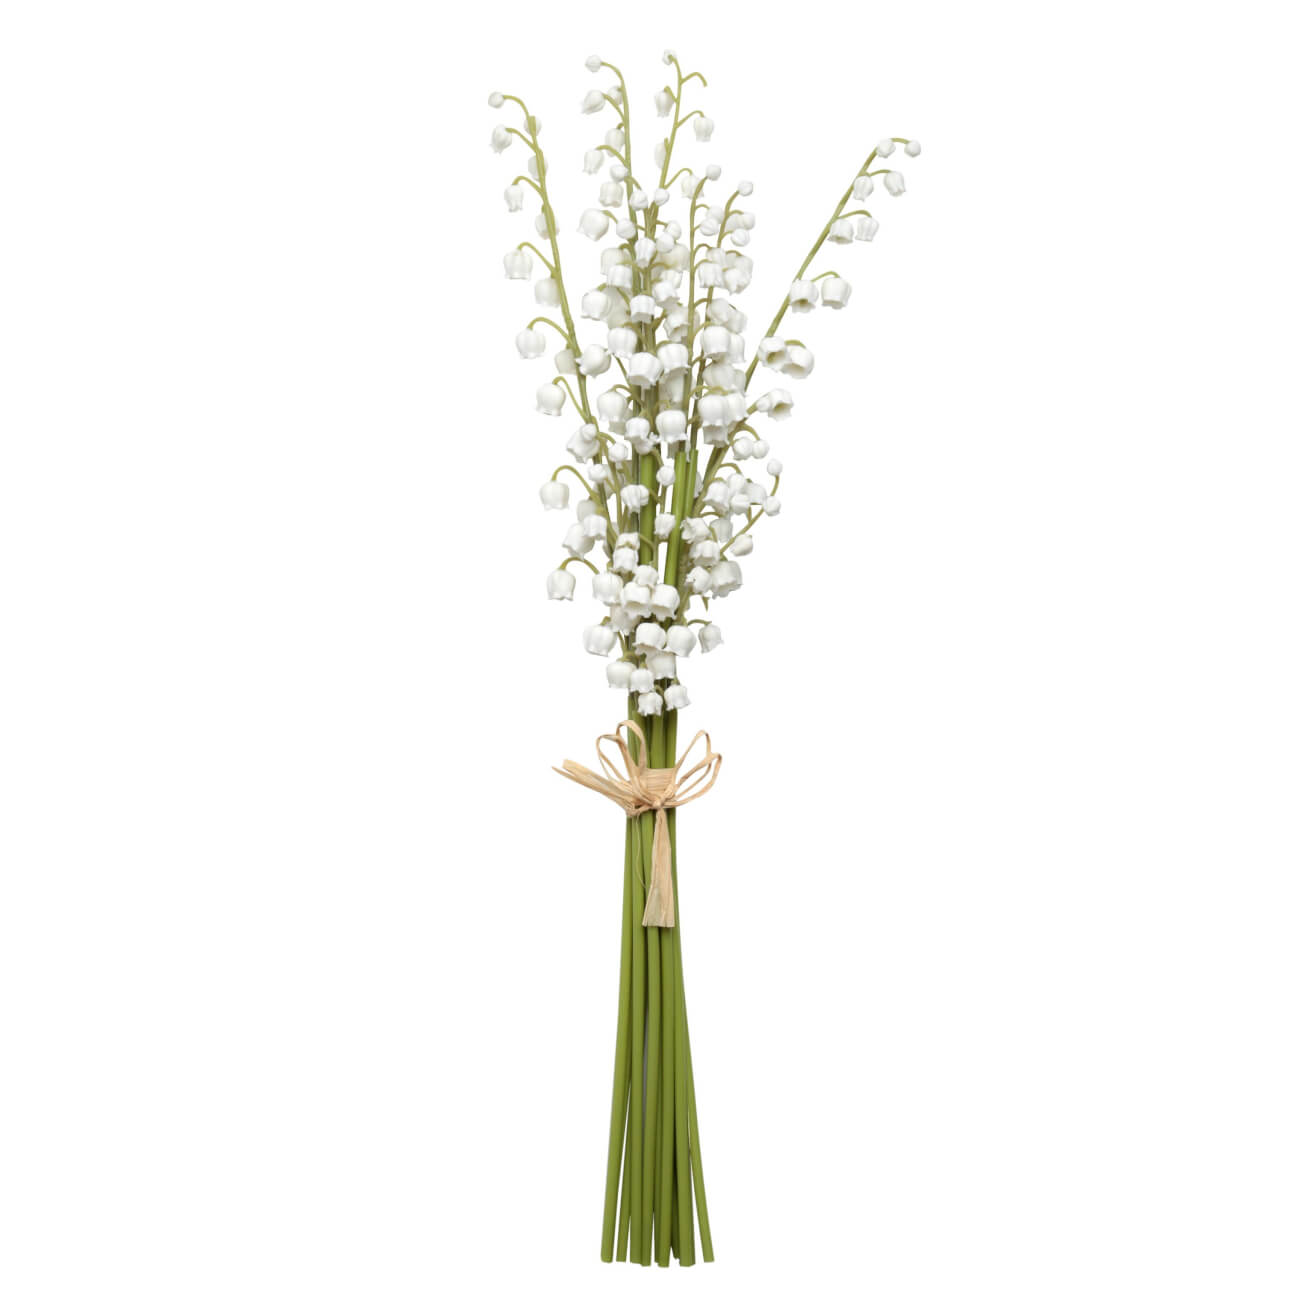 Artificial bouquet, 42 cm, plastic / polyurethane, Lily of the valley, May-lily изображение № 1